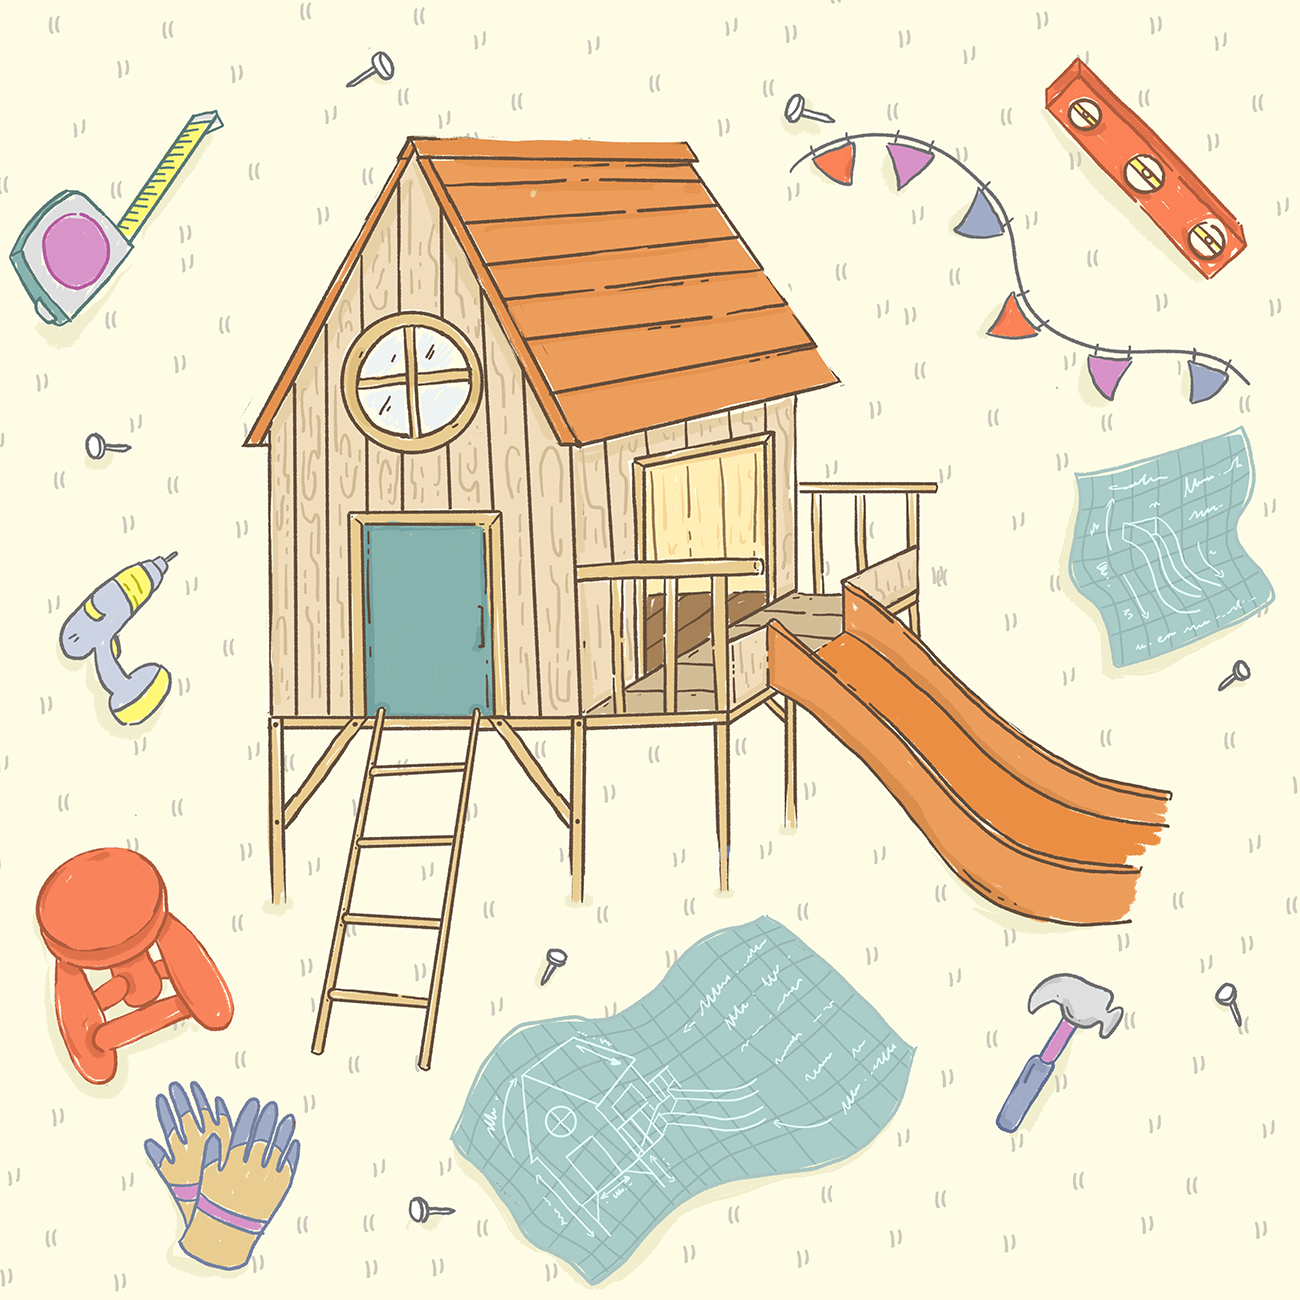 10 Playhouse Plans to Make Your Kids’ Dreams Come True